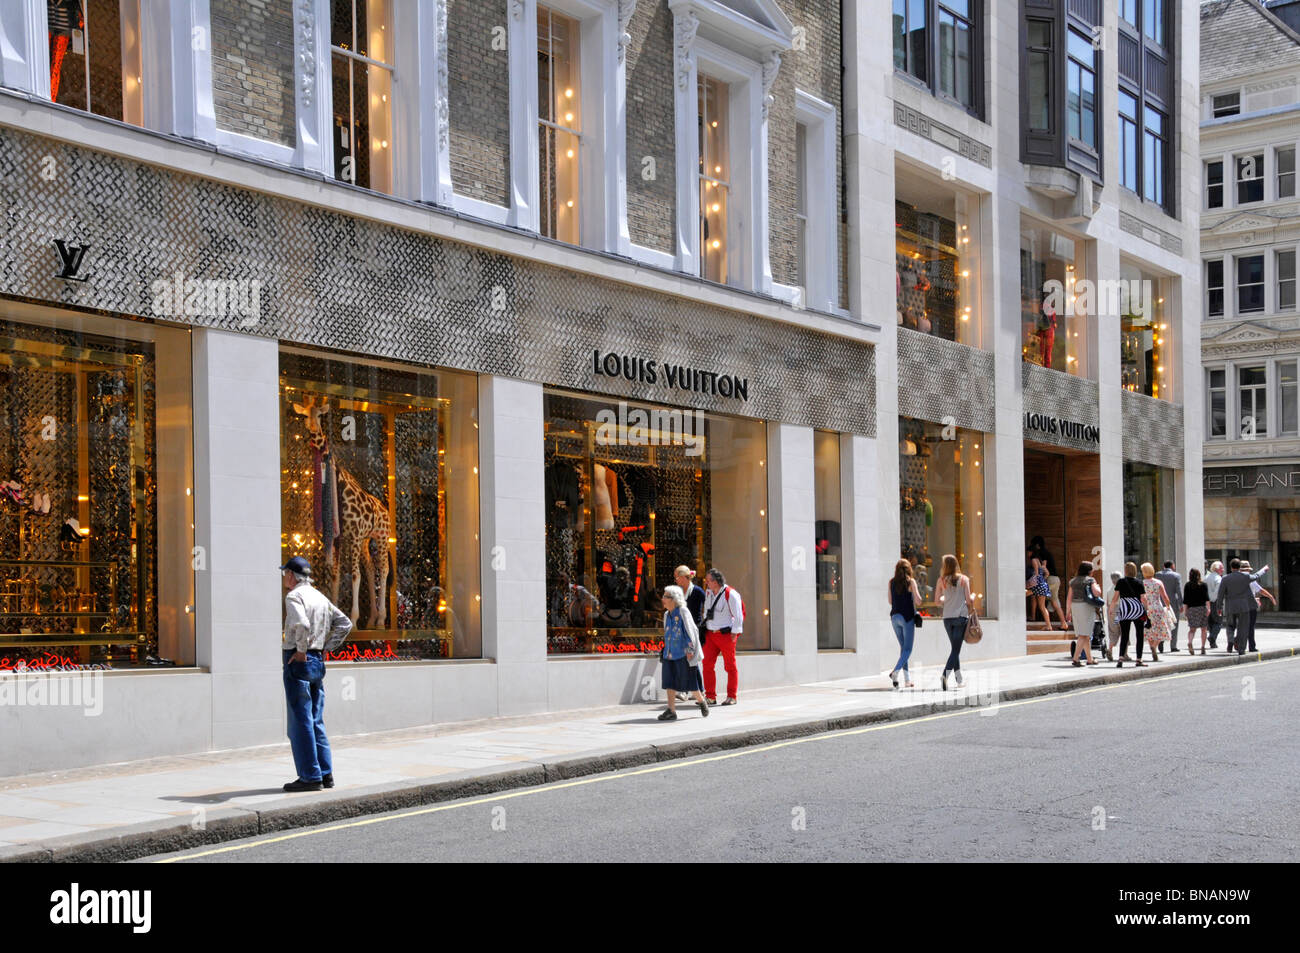 Louis Vuitton London High Resolution Stock Photography and Images - Alamy